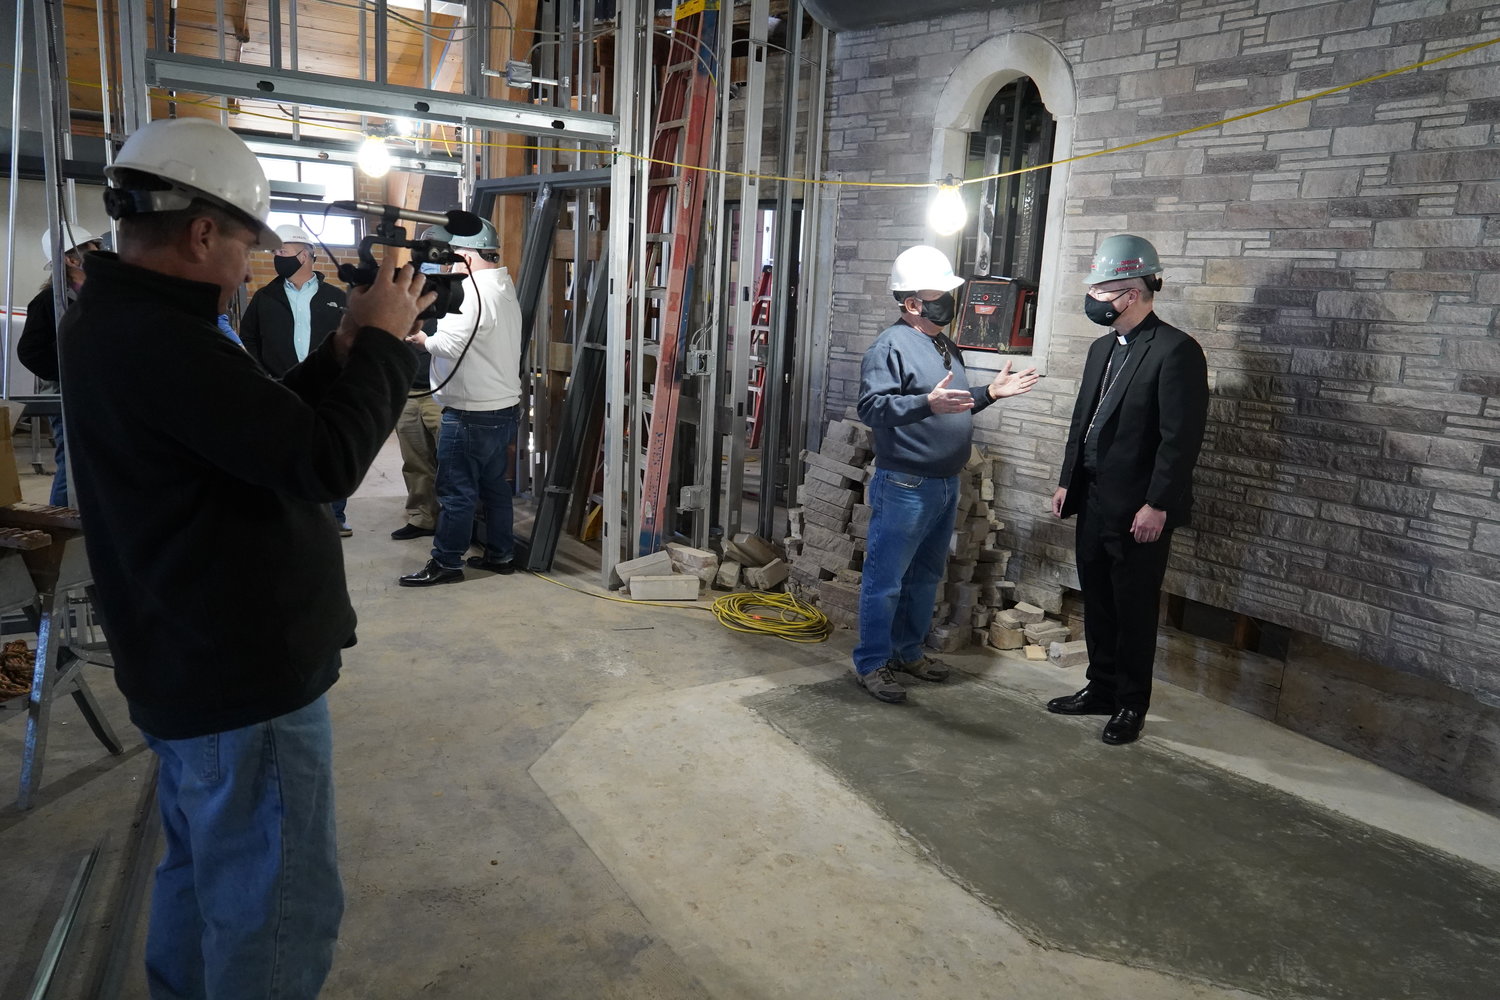 Bishop W. Shawn McKnight visits with retired local contractor Jim Wisch, a member of the CCCNMO board of directors and the Shikles redevelopment planning committee. The bishop is standing where the altar for the former La Salette Seminary Chapel once stood.